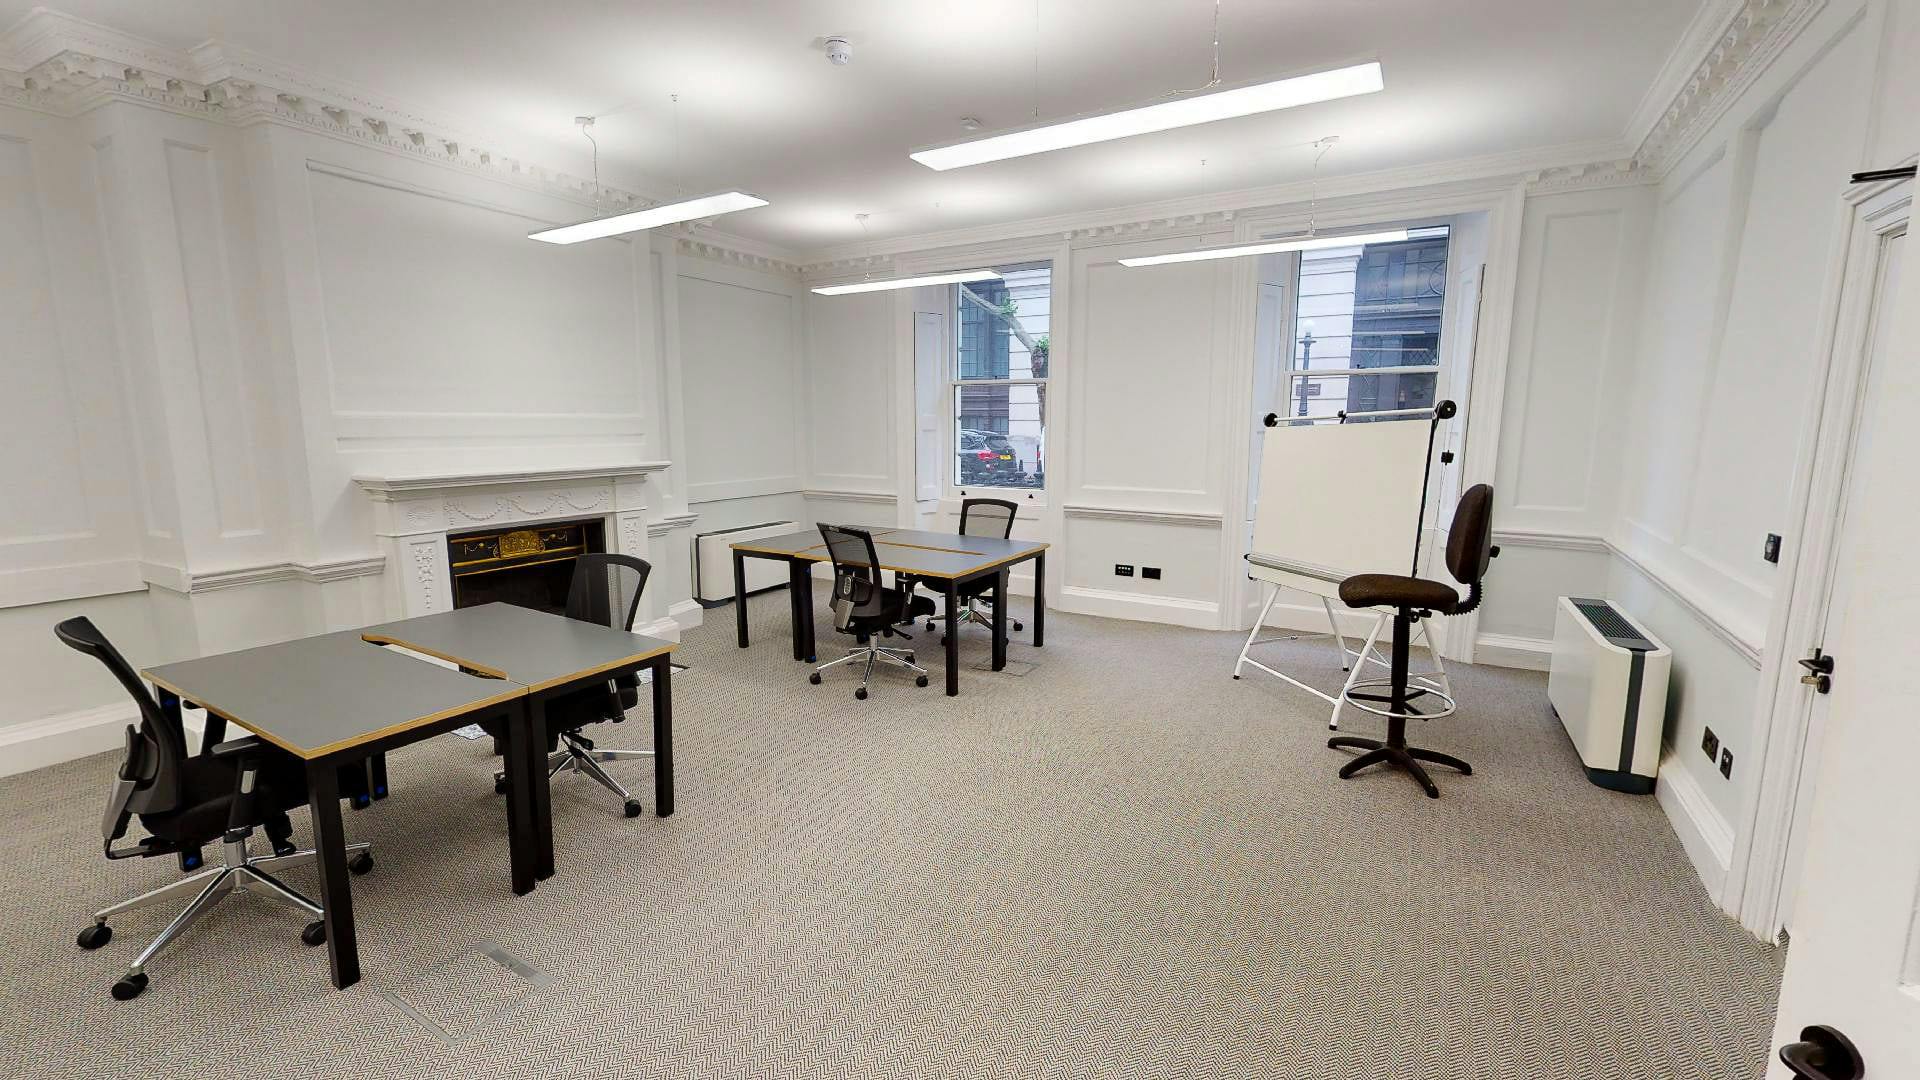 Holborn - 4-6 Person Office - Bloomsbury Place